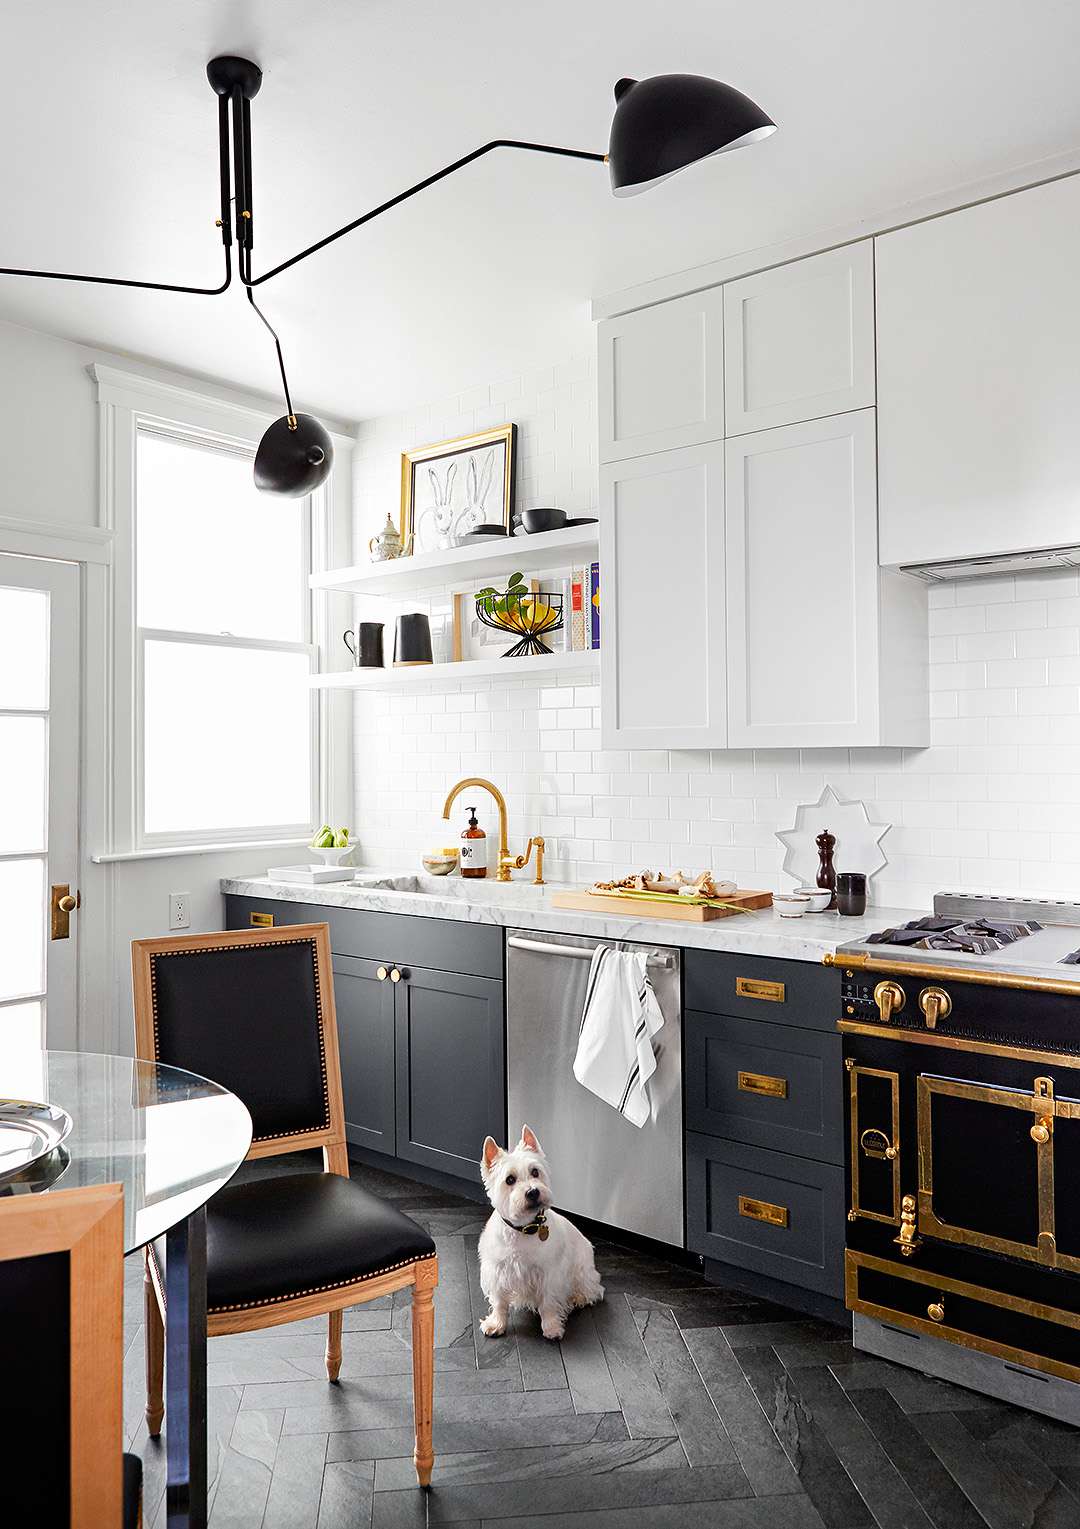 modern kitchen with dark cabinets below and white cabinets above, black and gold oven range